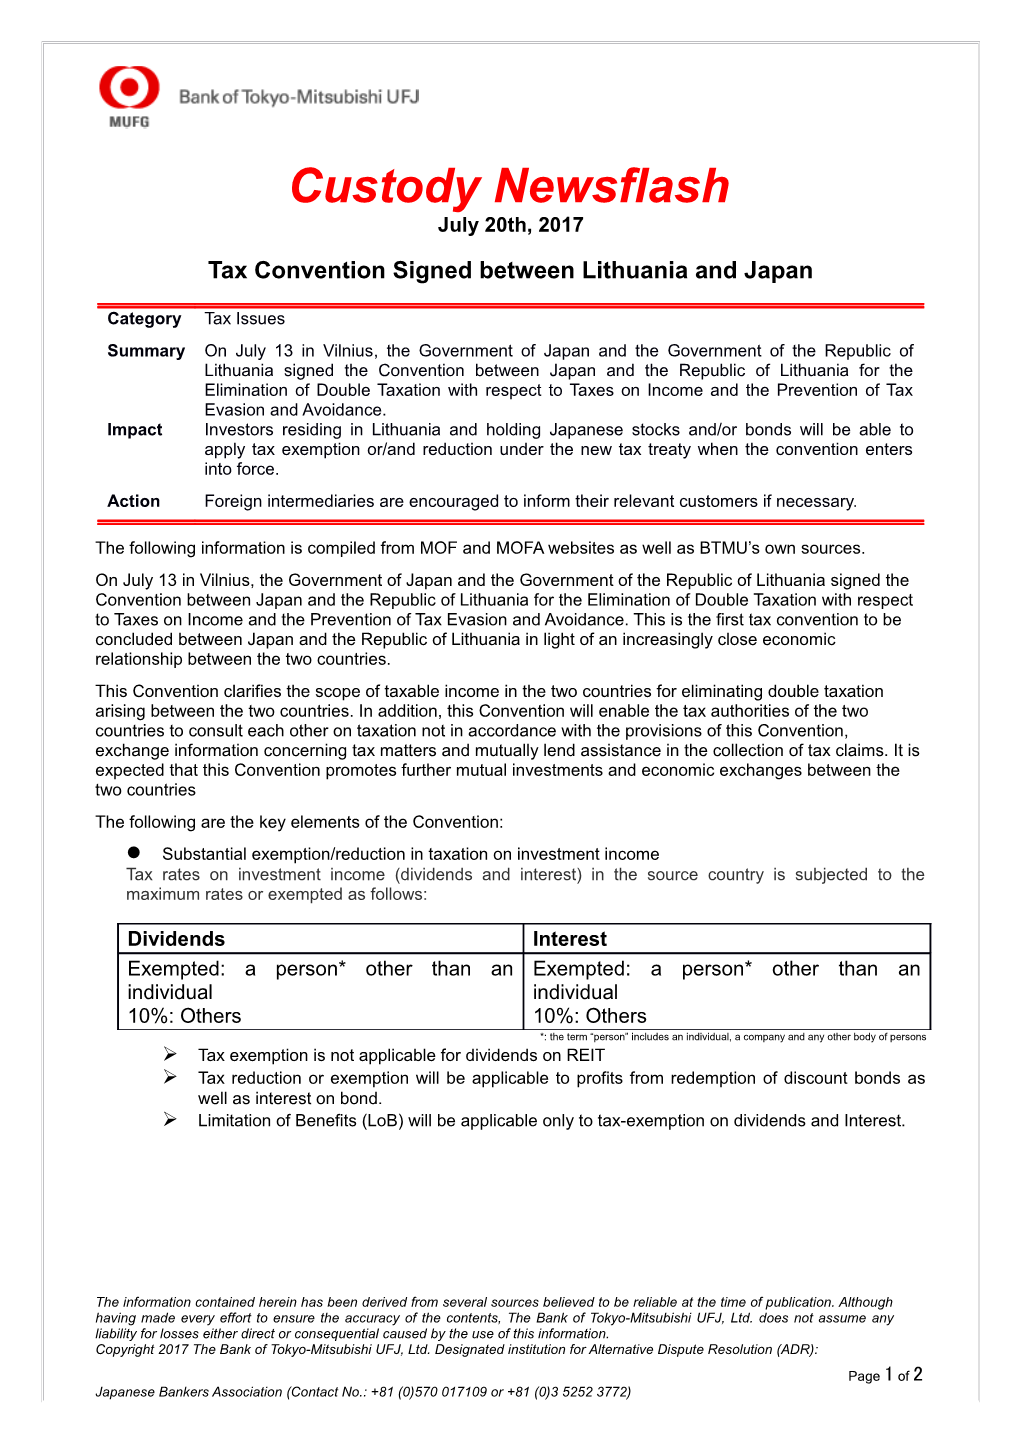 Tax Convention Signed Between Lithuania and Japan